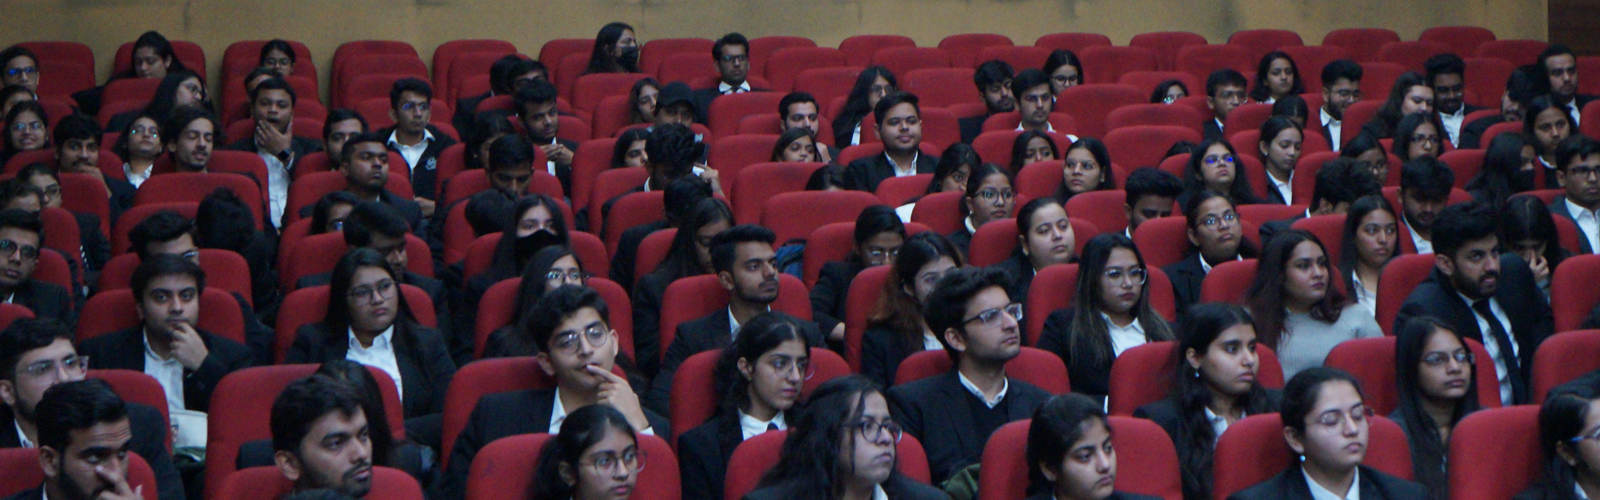 Conducted workshop on corporate law for law students at VIPS, Delhi